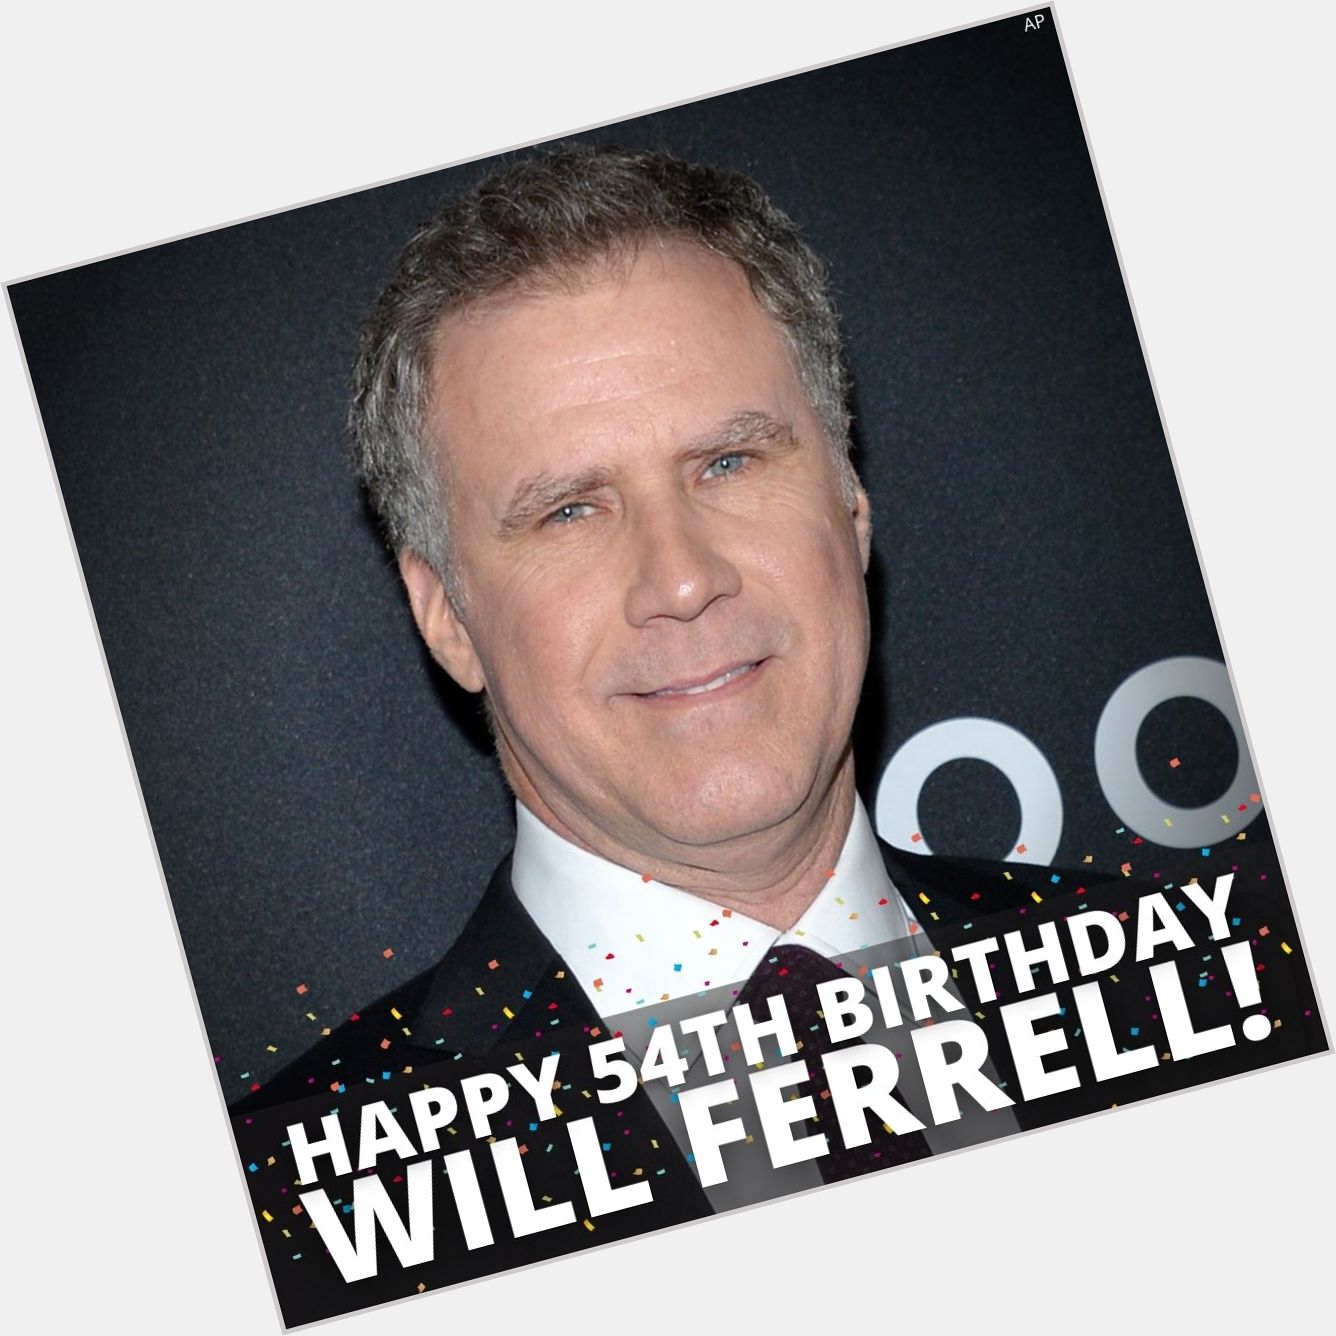 Happy 54th birthday, Will Ferrell! 
What\s your favorite movie of his? Does it make us biased if we say Anchorman? 